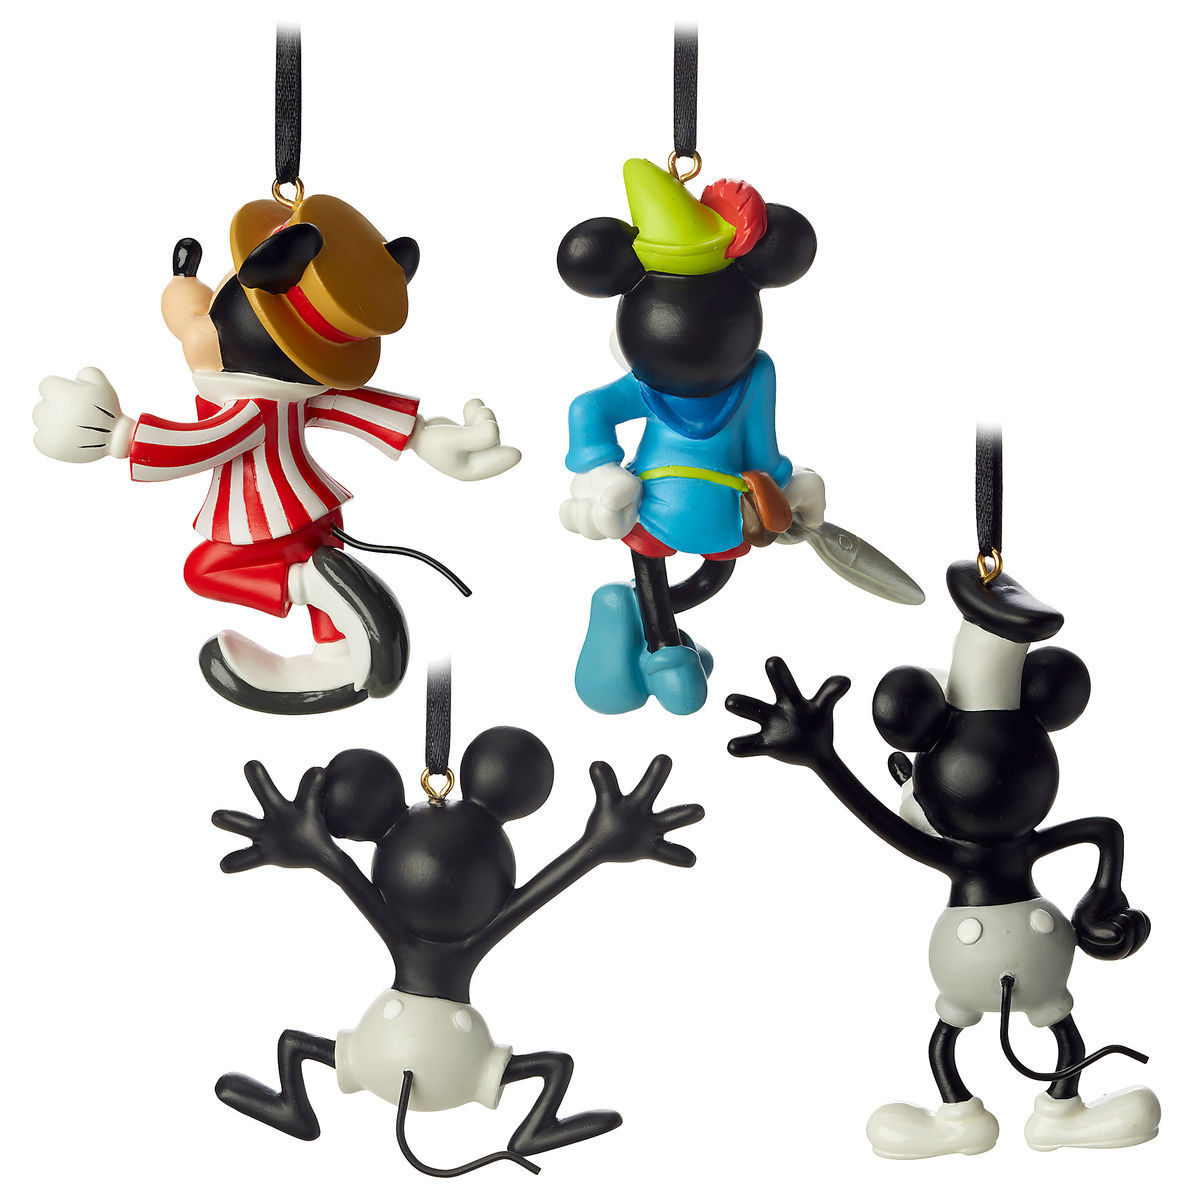 Disney Mickey Mouse Through the Years Mini Ornament Set Steamboat Willie New